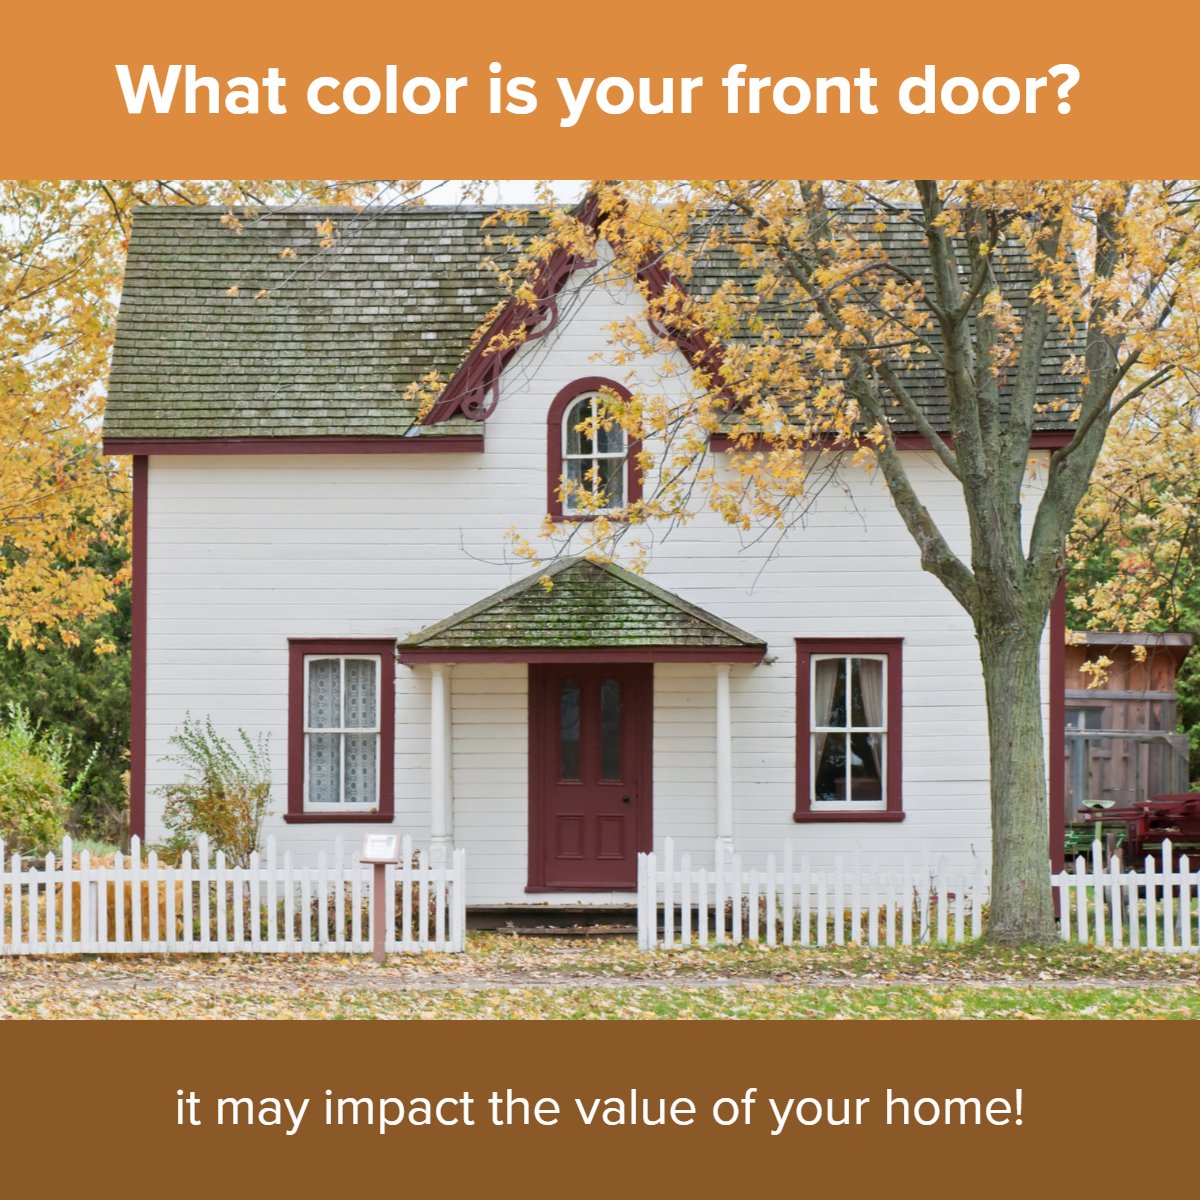 What color is your front door 🚪

Did you know it may impact the value of your home

#questions #frontdoor #doorcolor #exterior
 #MVPRealty #Jayneyardenrealtor #Gulfcoastrealestate #Tampabayrealestate #floridarealestateforsale #florida #movetoflorida #ziptourswithjayney